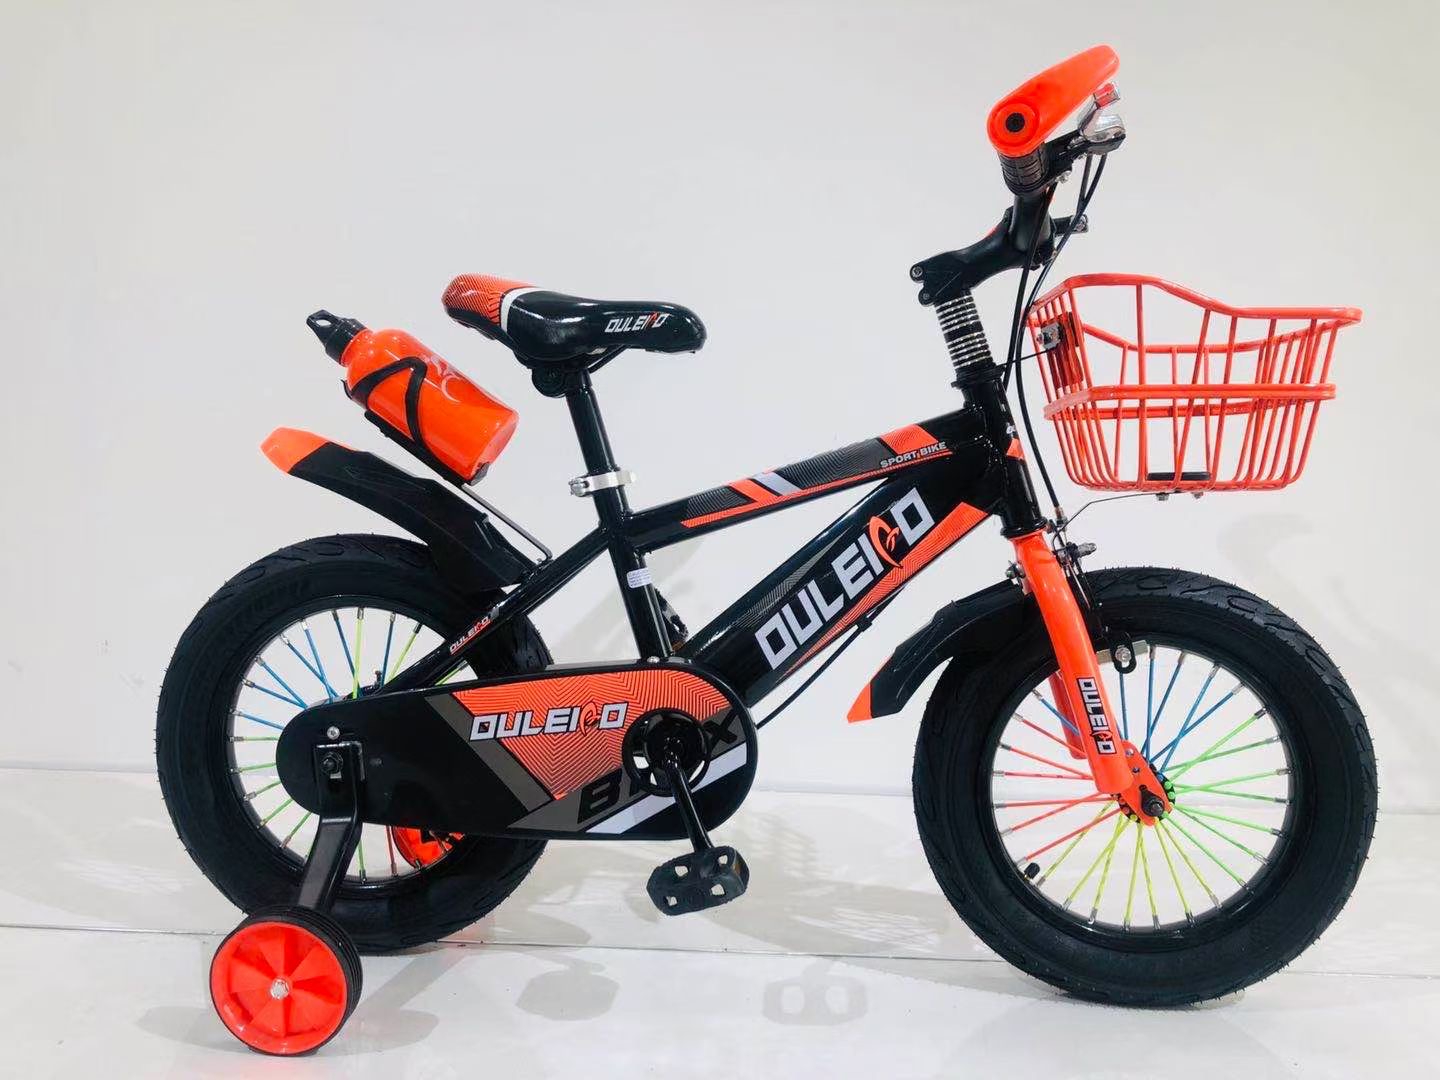 Popular style four wheel cycles / kids bike for baby boys / cheap price children exercise bicycle